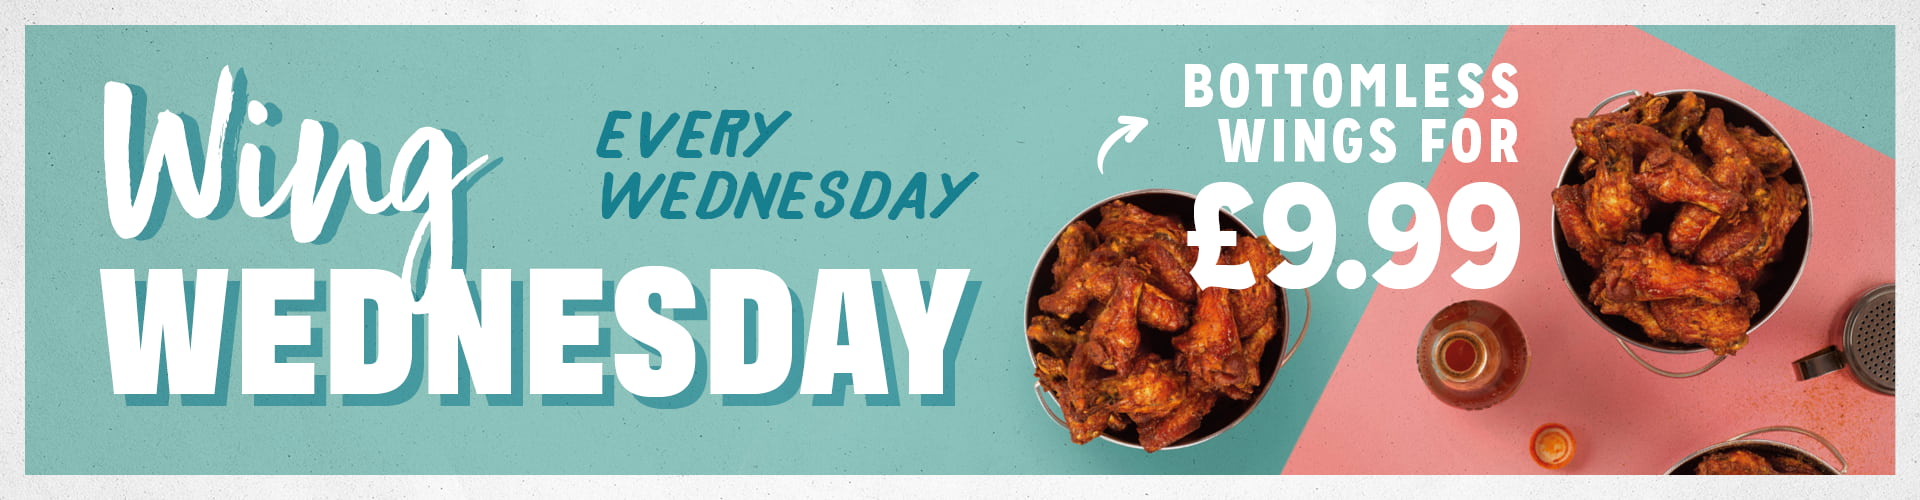 Wing Wednesday Every Wednesday. Bottomless Wings for £9.99